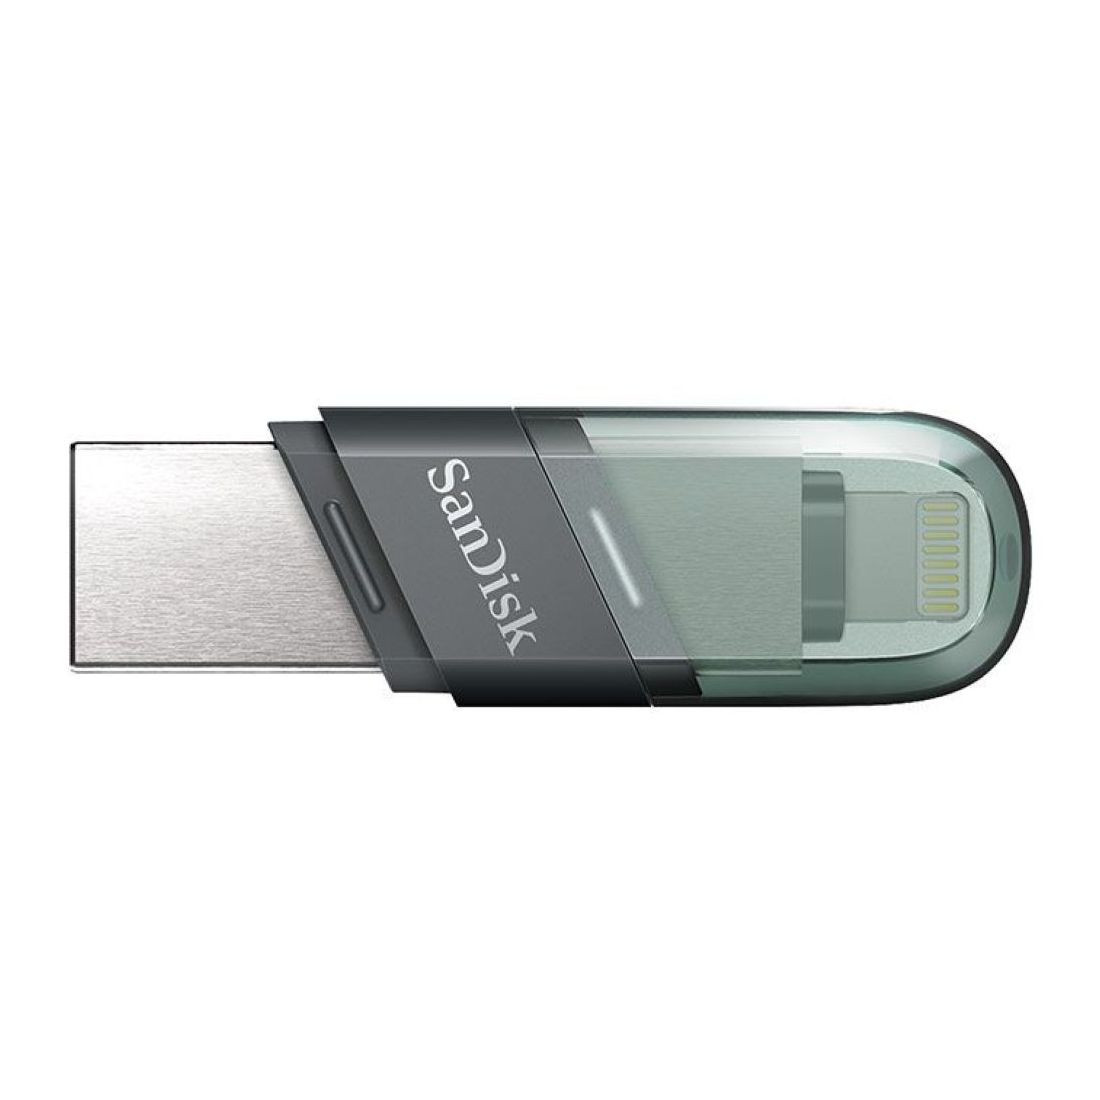 Sandisk 128GB Ixpand Flash Drive for iOS